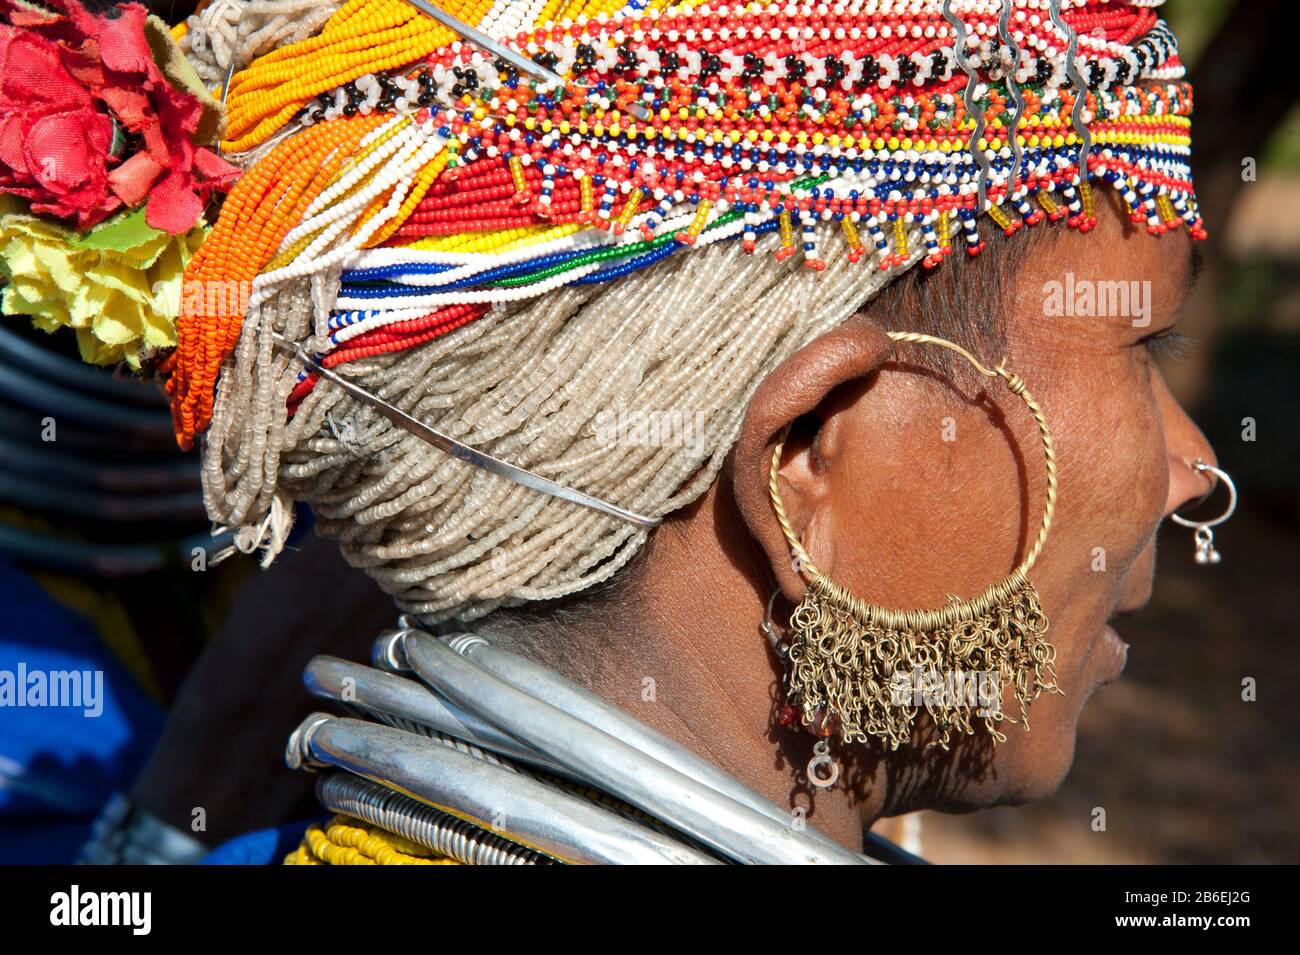 Bonda tribal women are known for their large earrings and elaborate beaded clothing, Onukudelli, Orissa, India Stock Photo